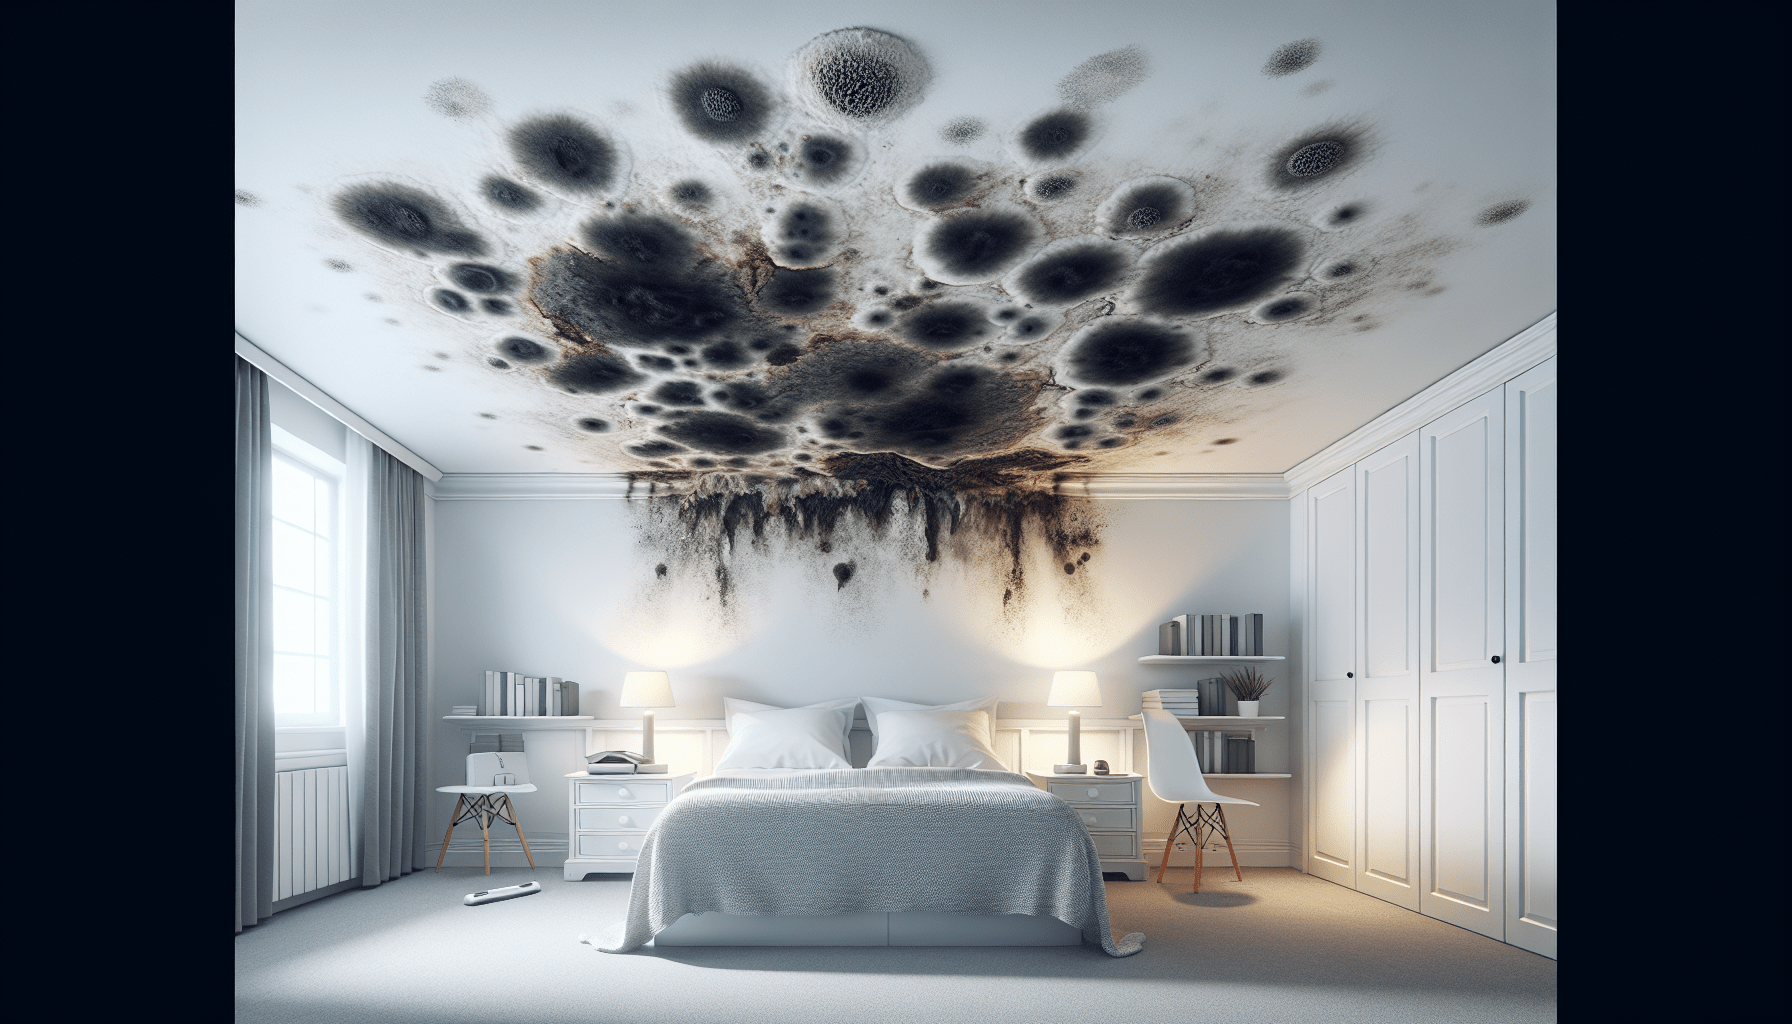 How to Get Rid of Mold on Your Ceiling